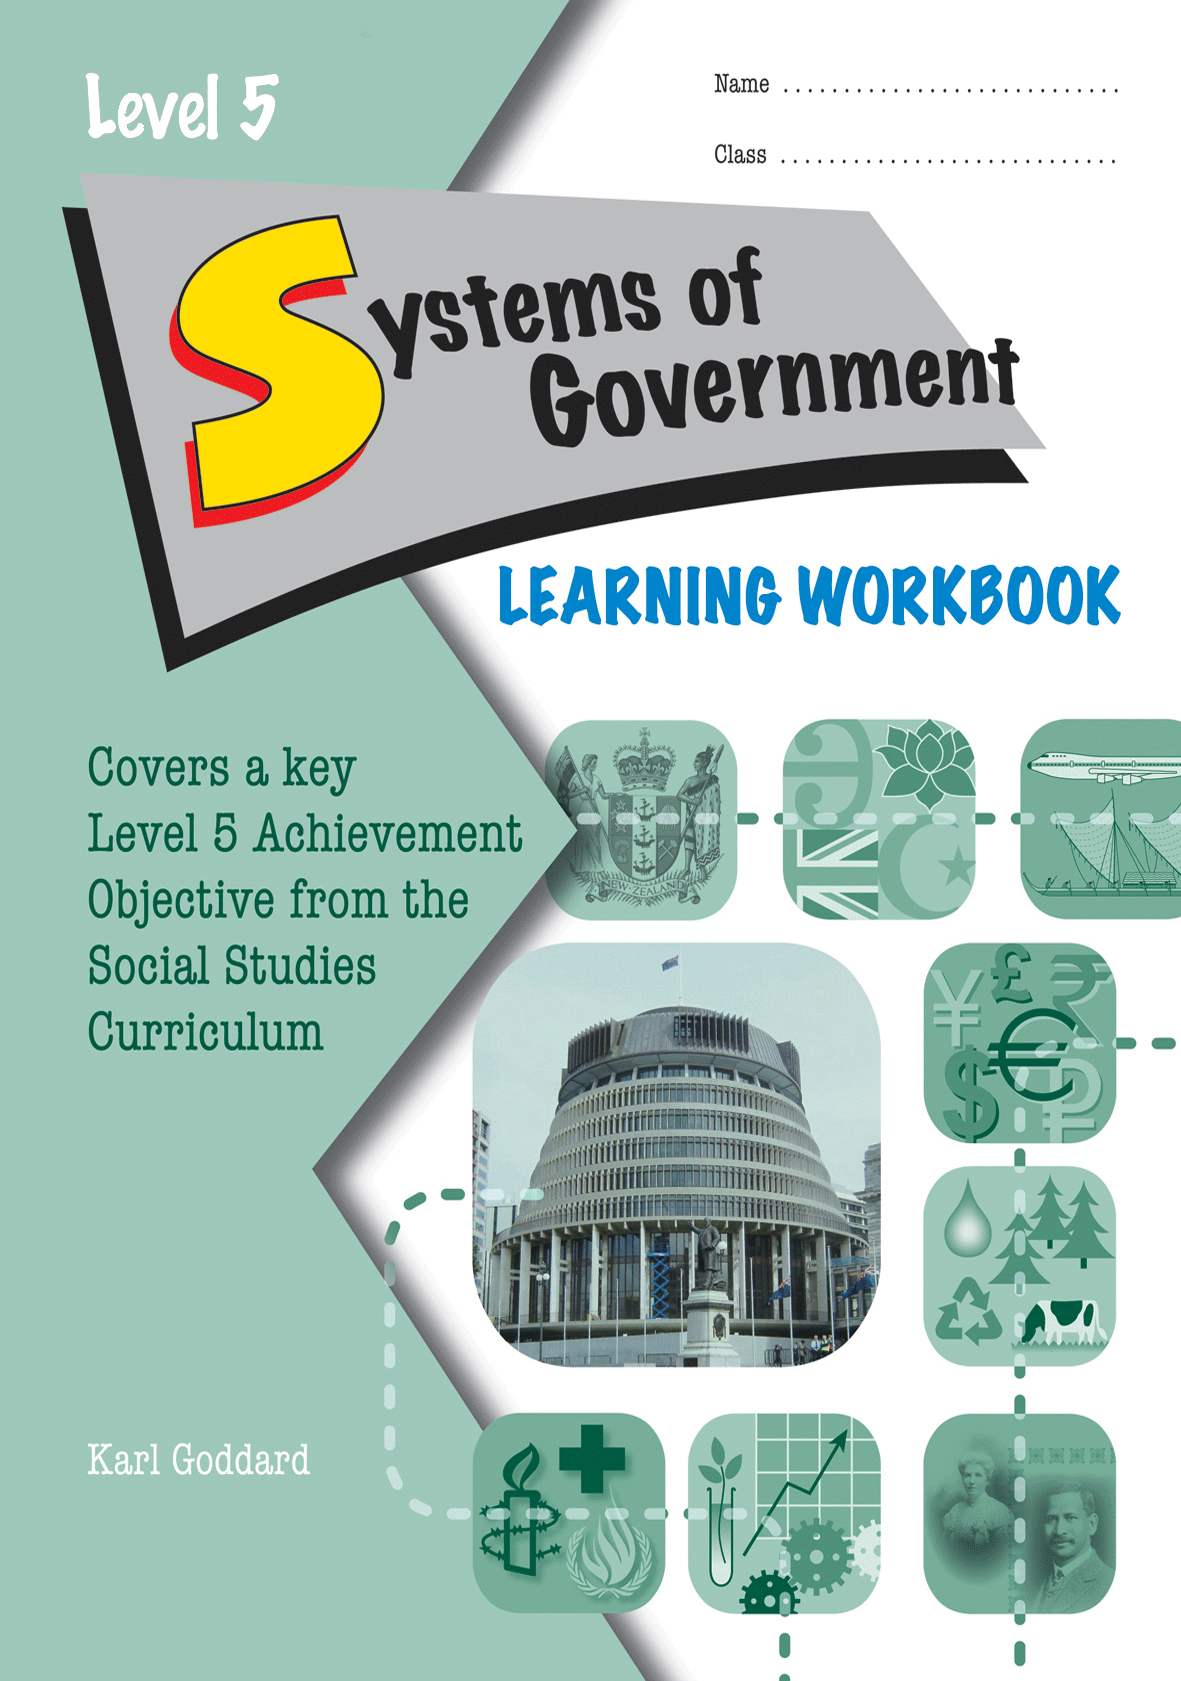 Level 5 Systems of Government Learning Workbook